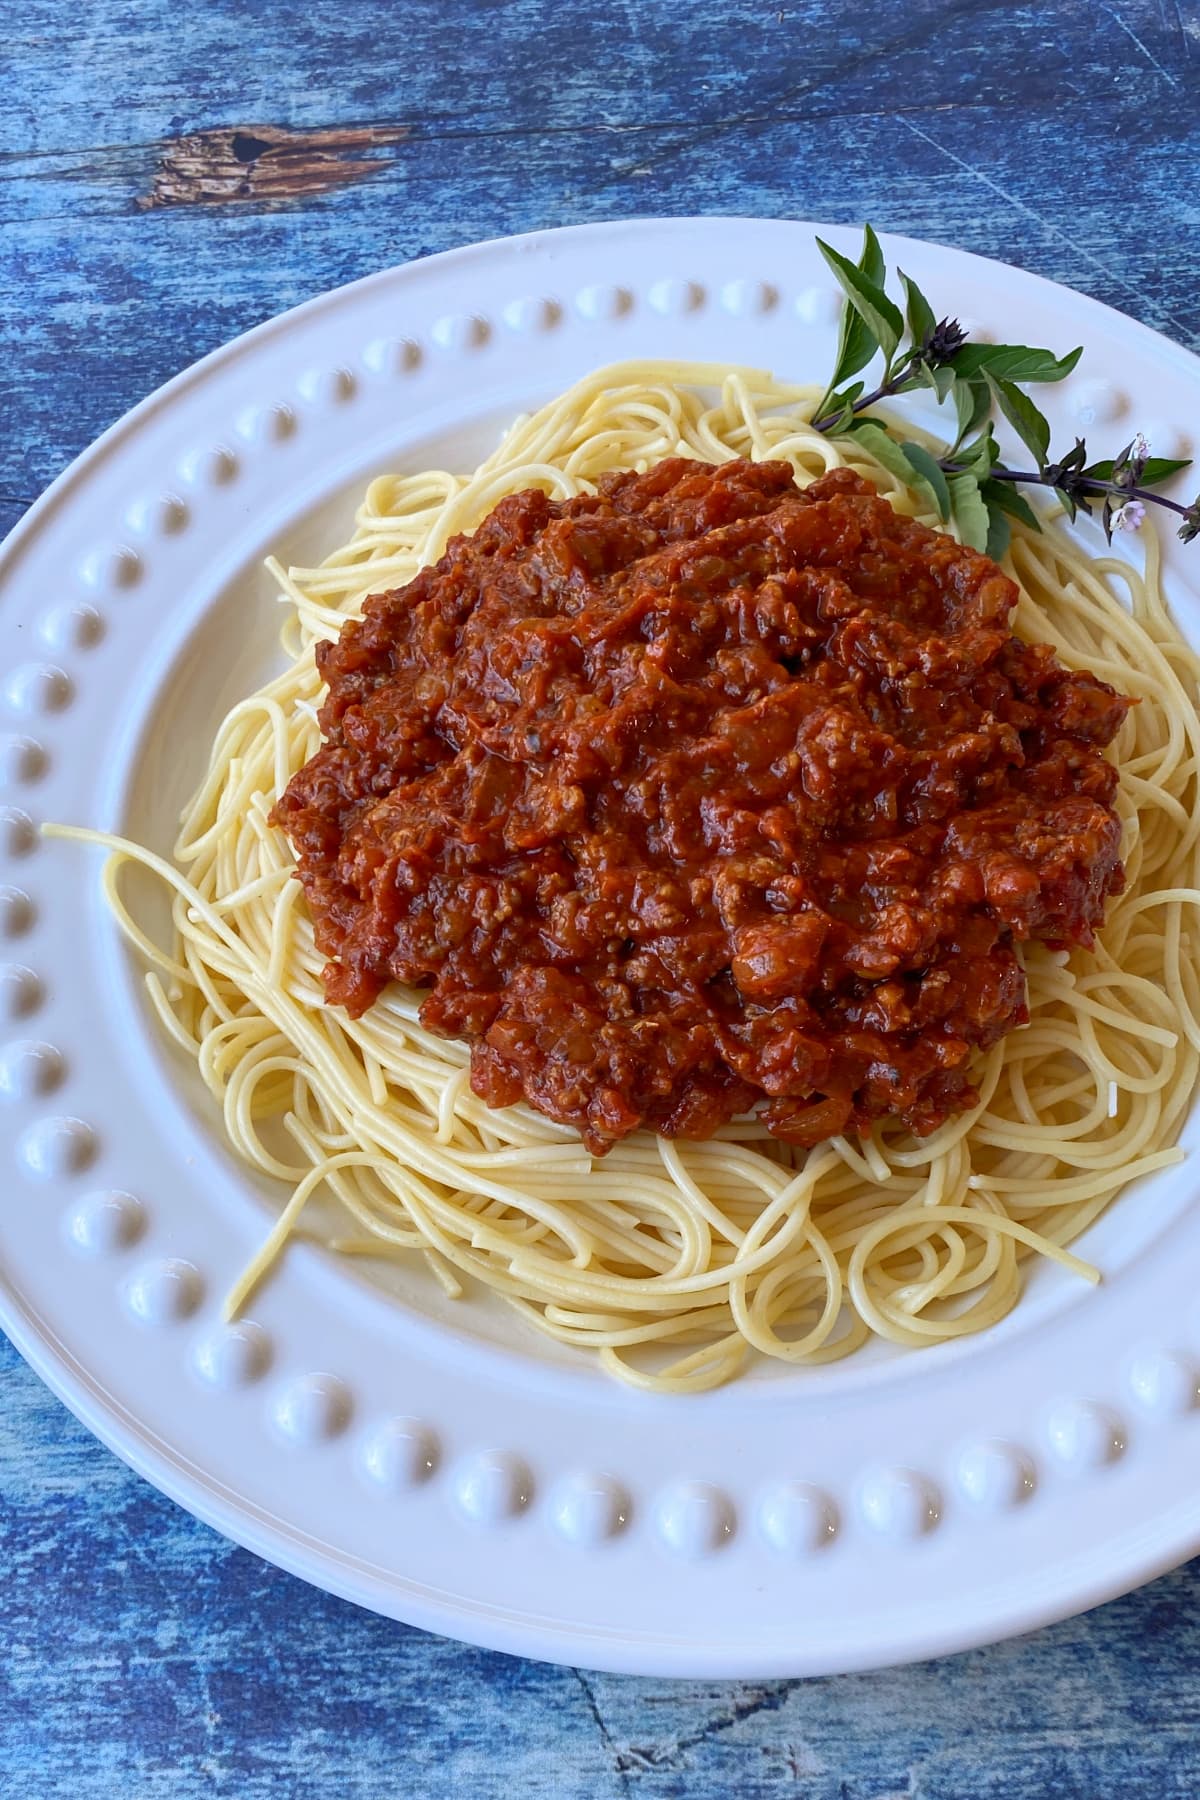 Classic American Spaghetti Sacue with meat, over thin spaghetti noodles.